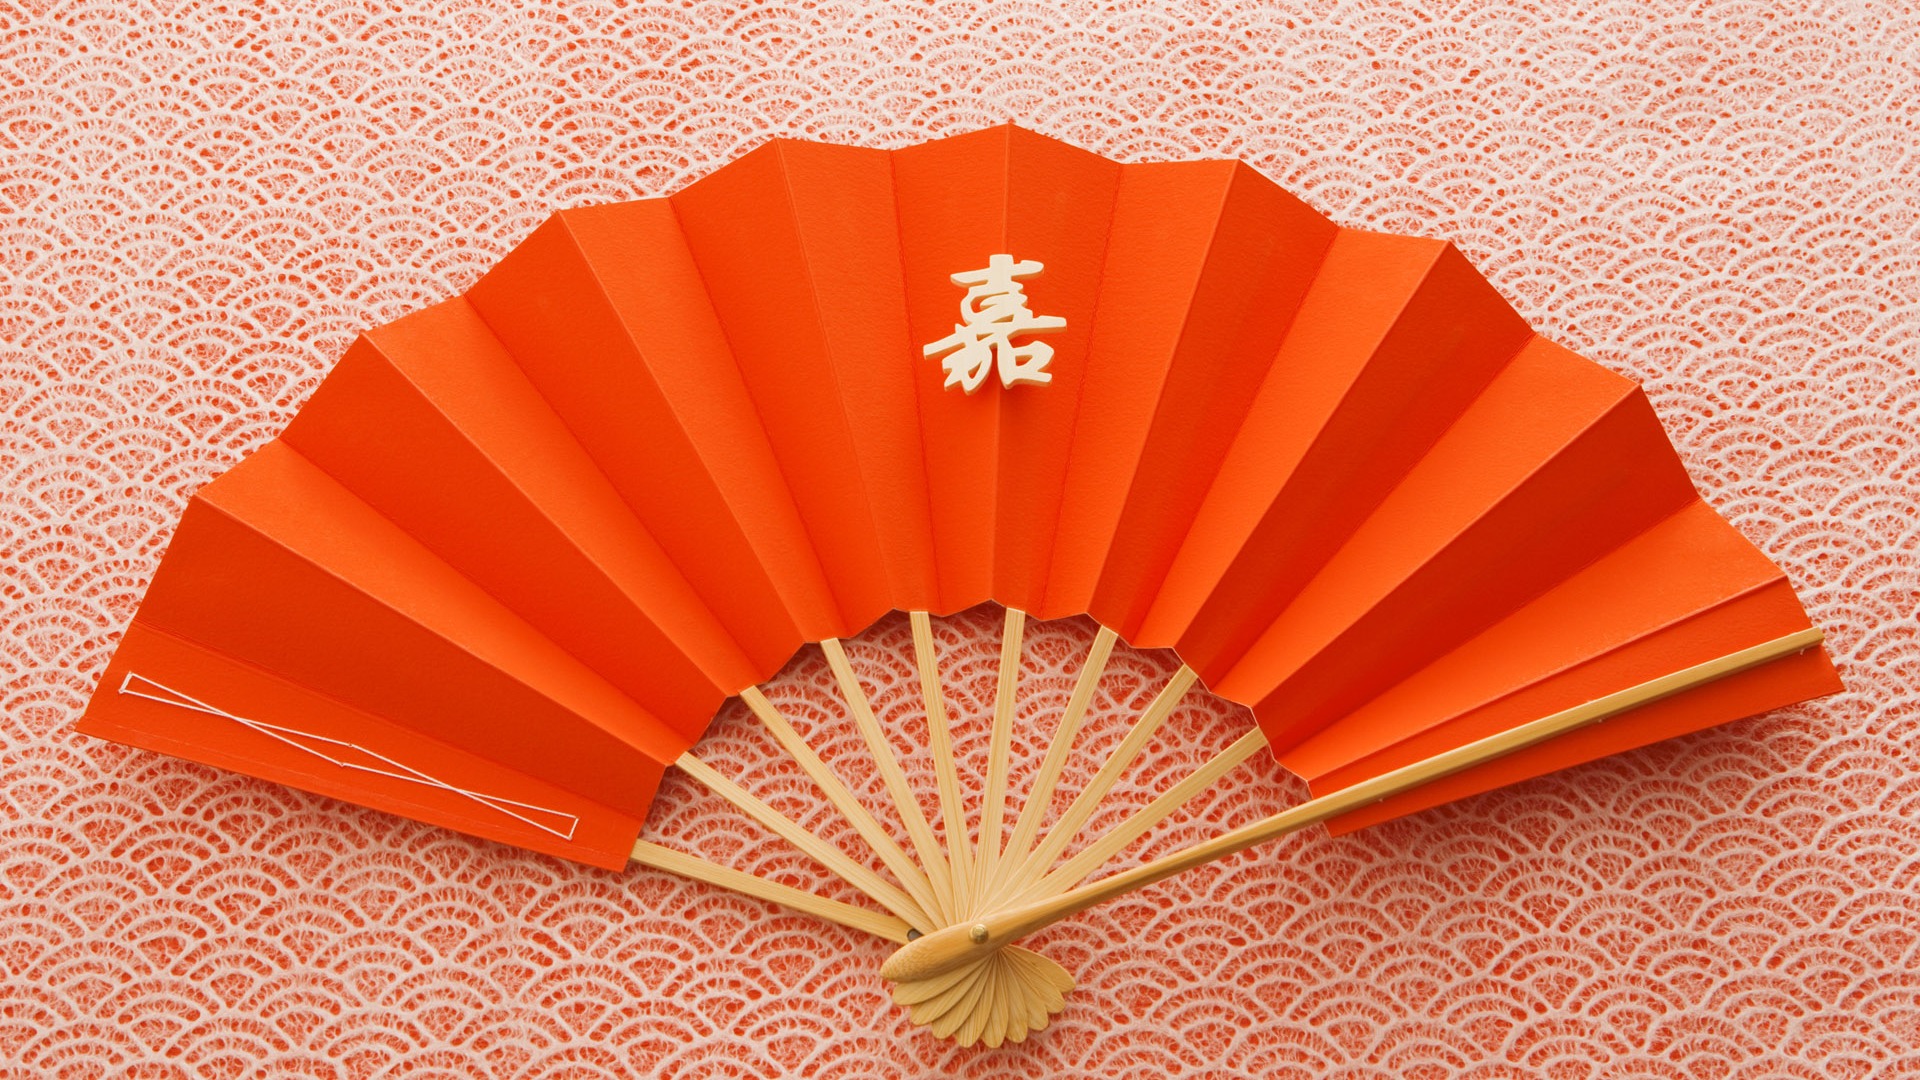 Japanese New Year Culture Wallpaper (2) #20 - 1920x1080